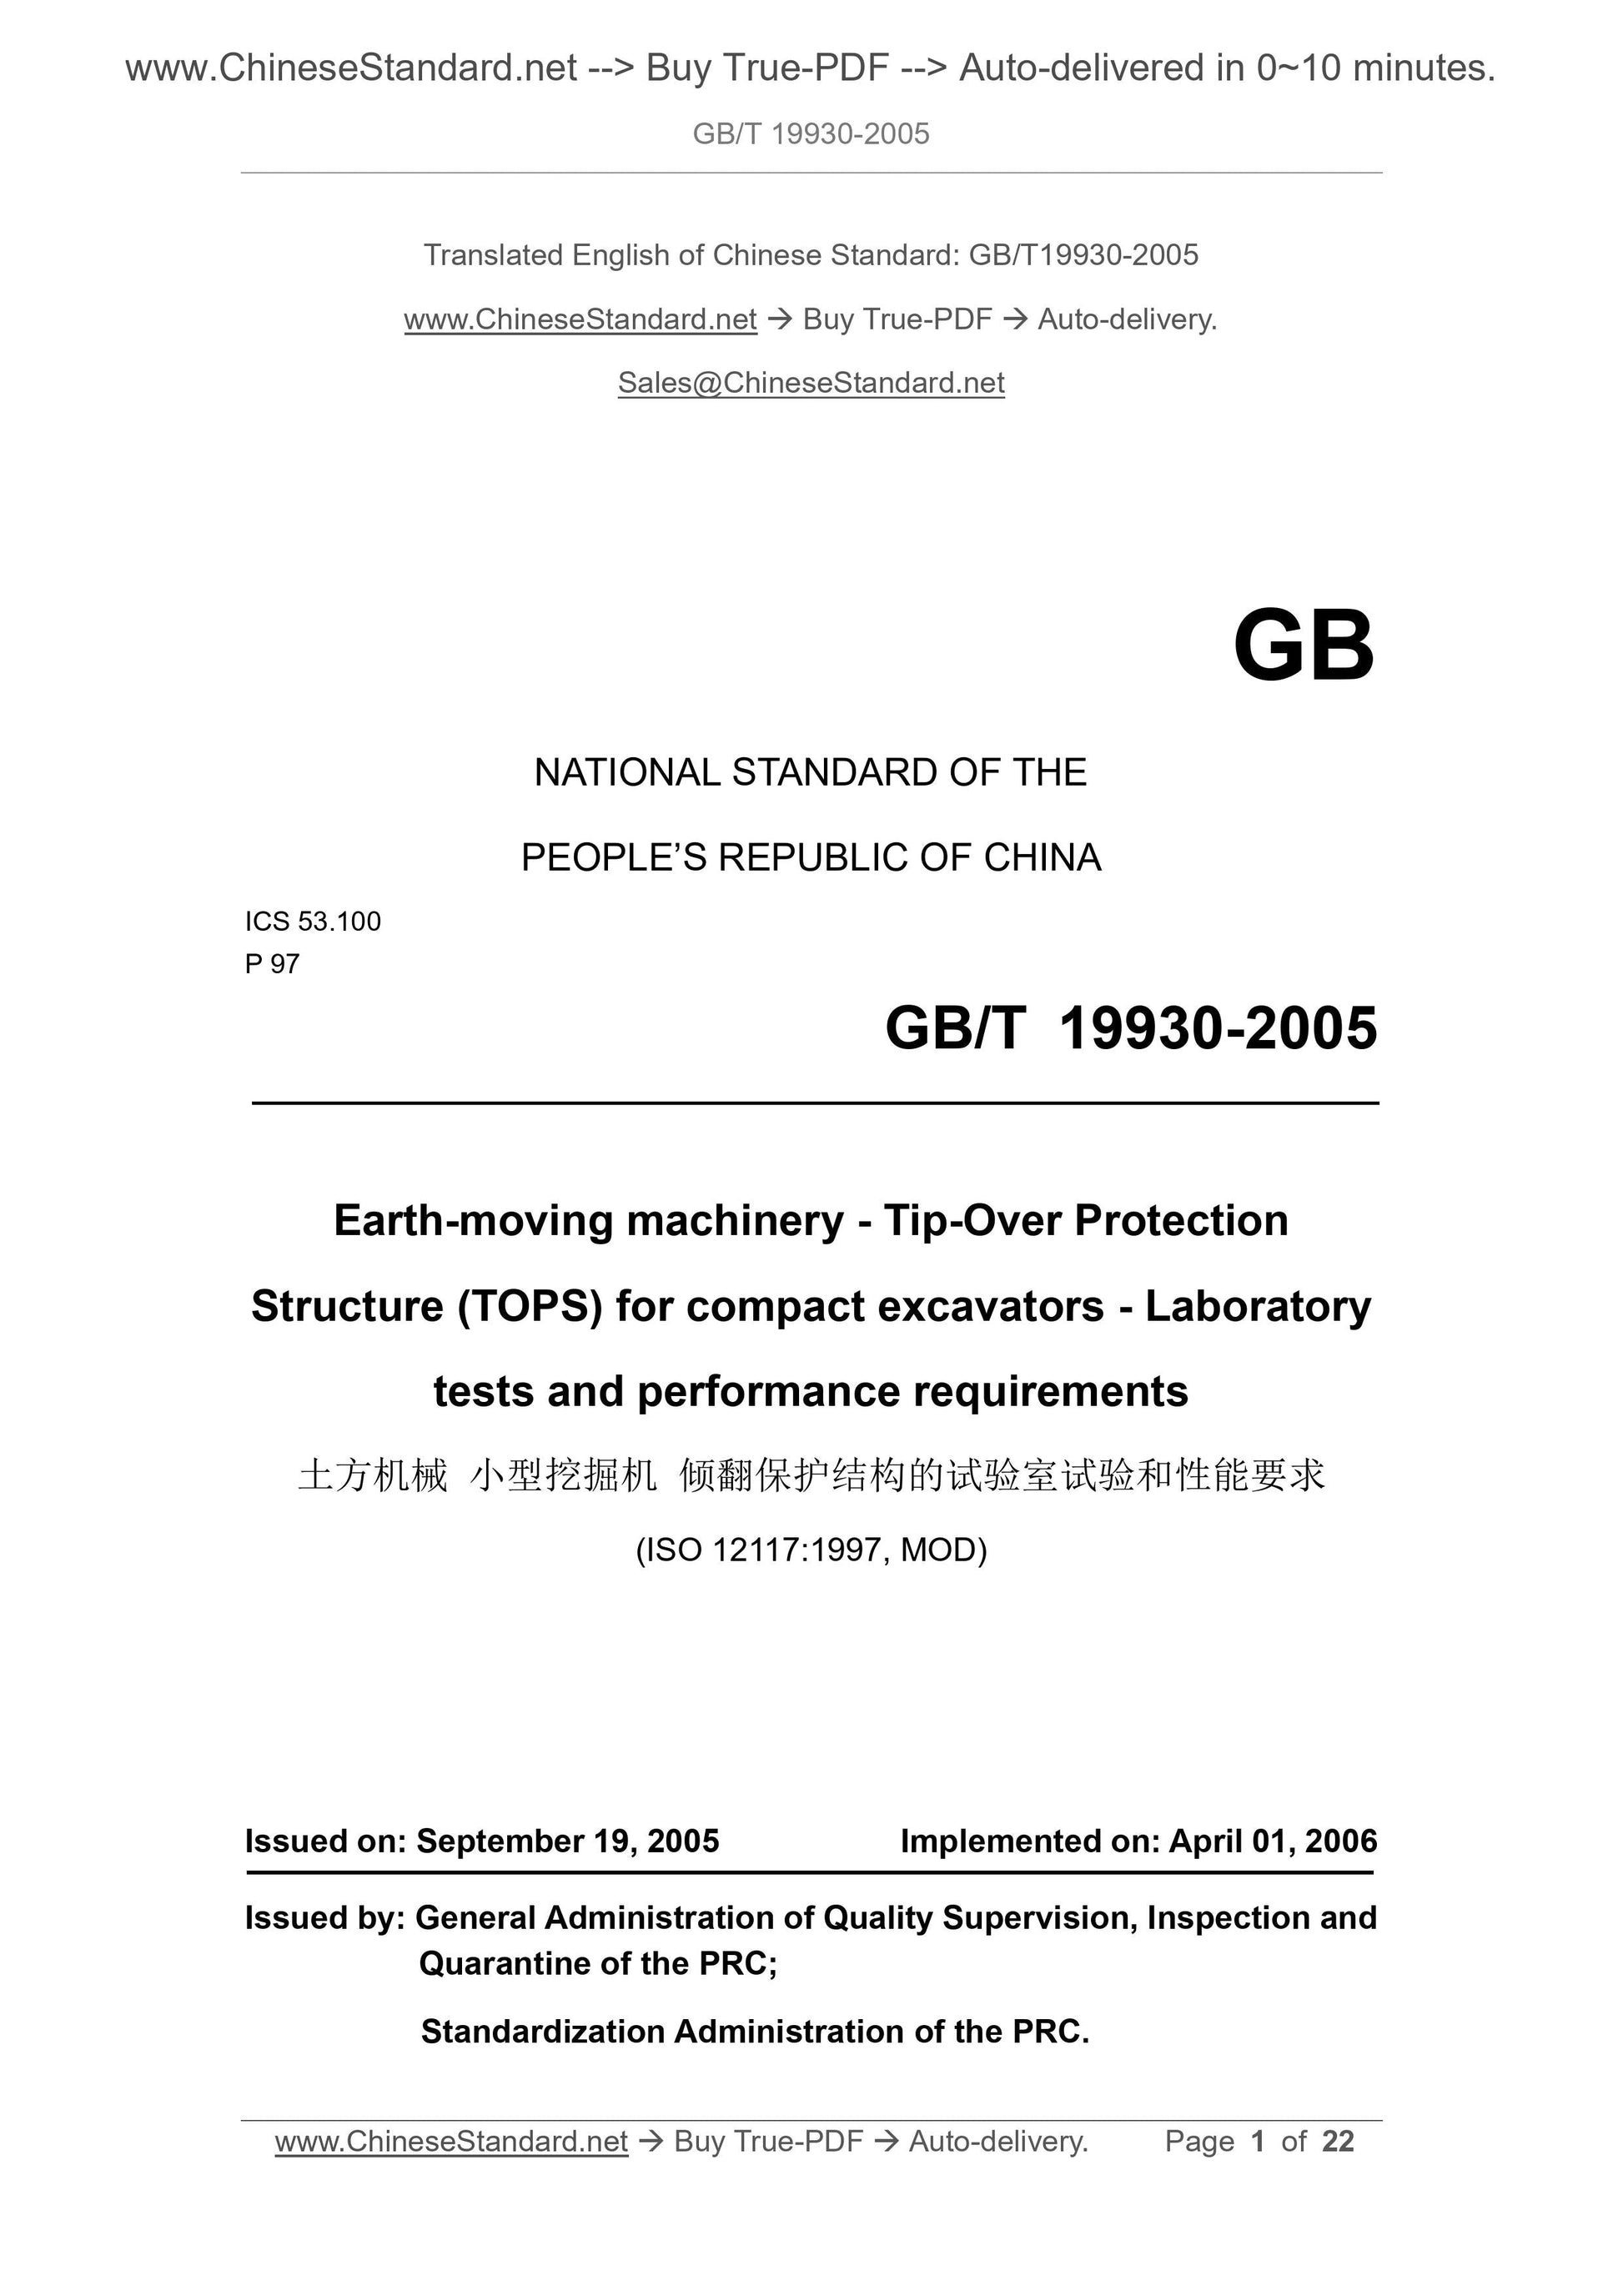 GB/T 19930-2005 Page 1